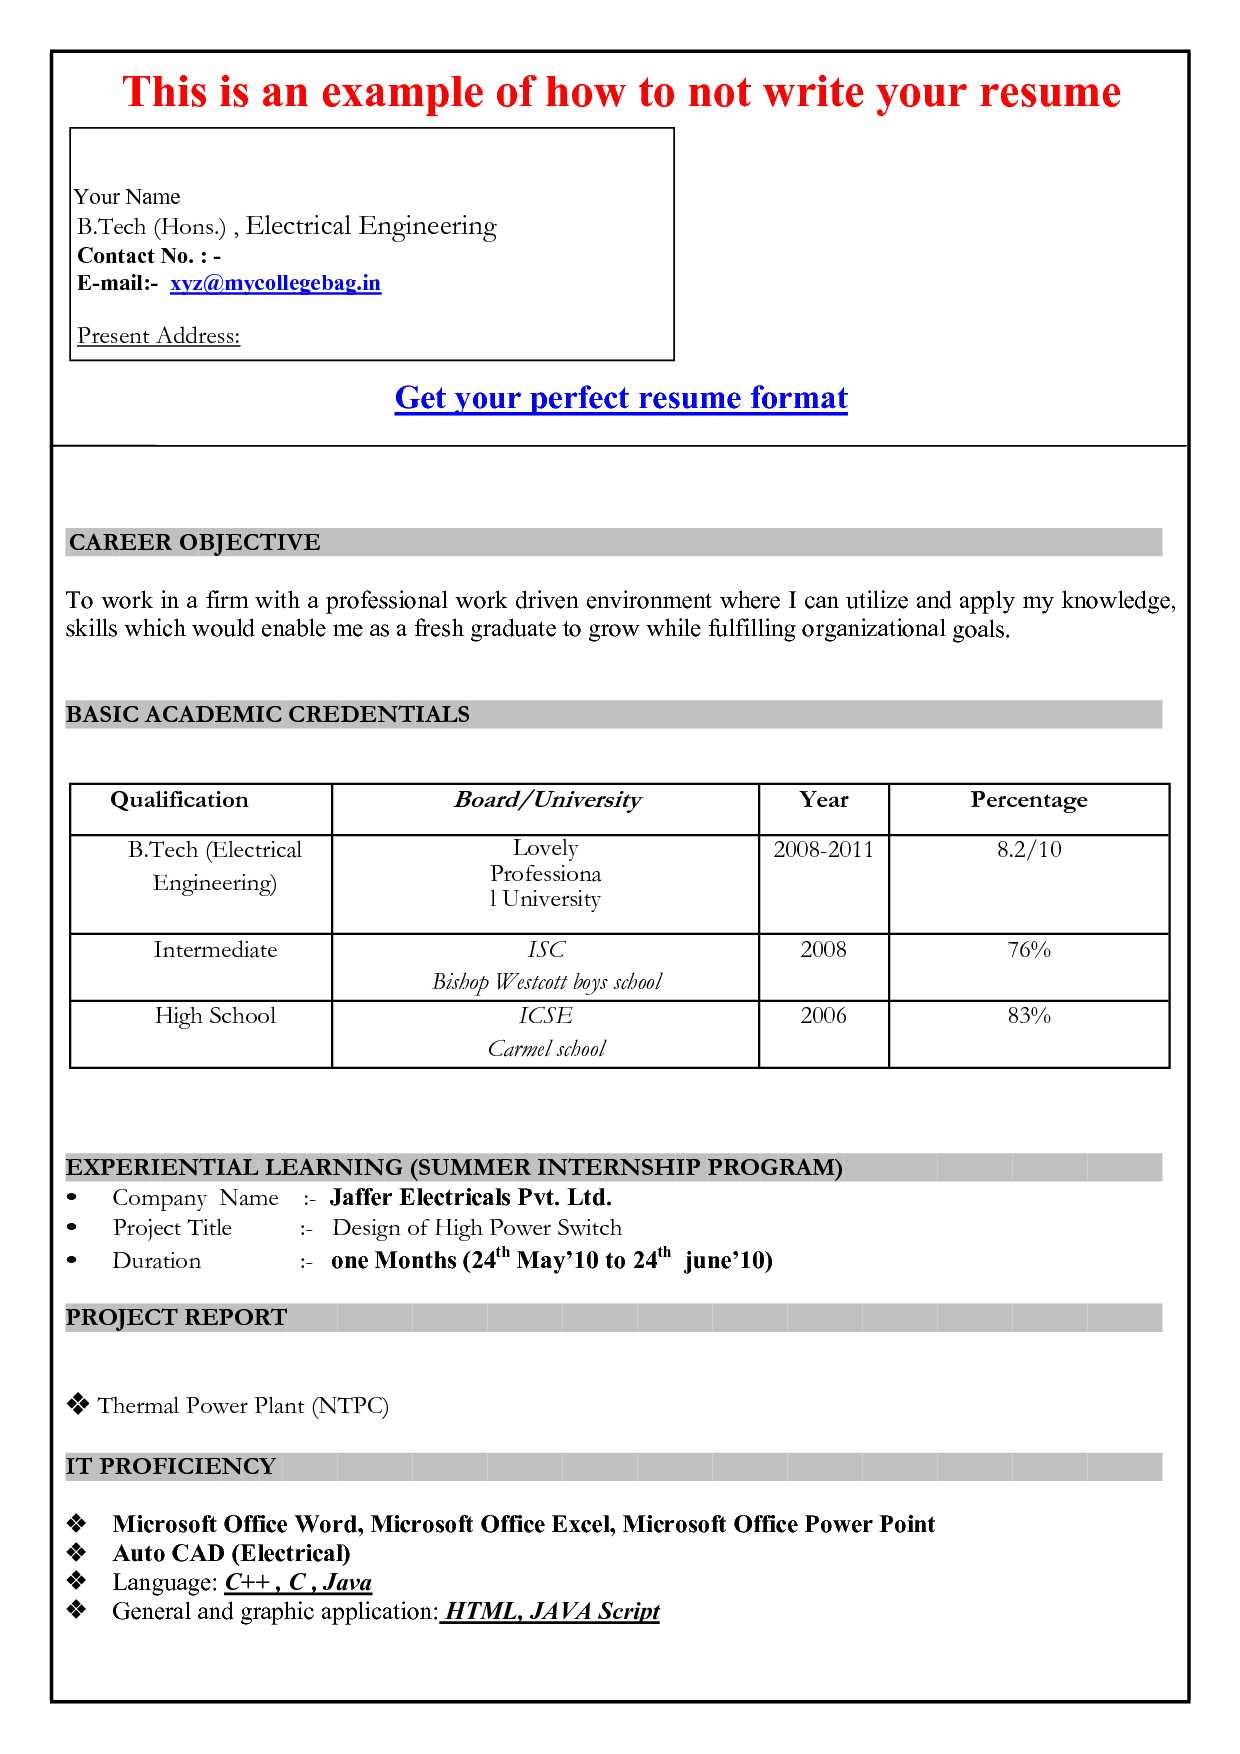 Free Download Resume Templates Microsoft Word 2007 In Resume Templates Word 2007